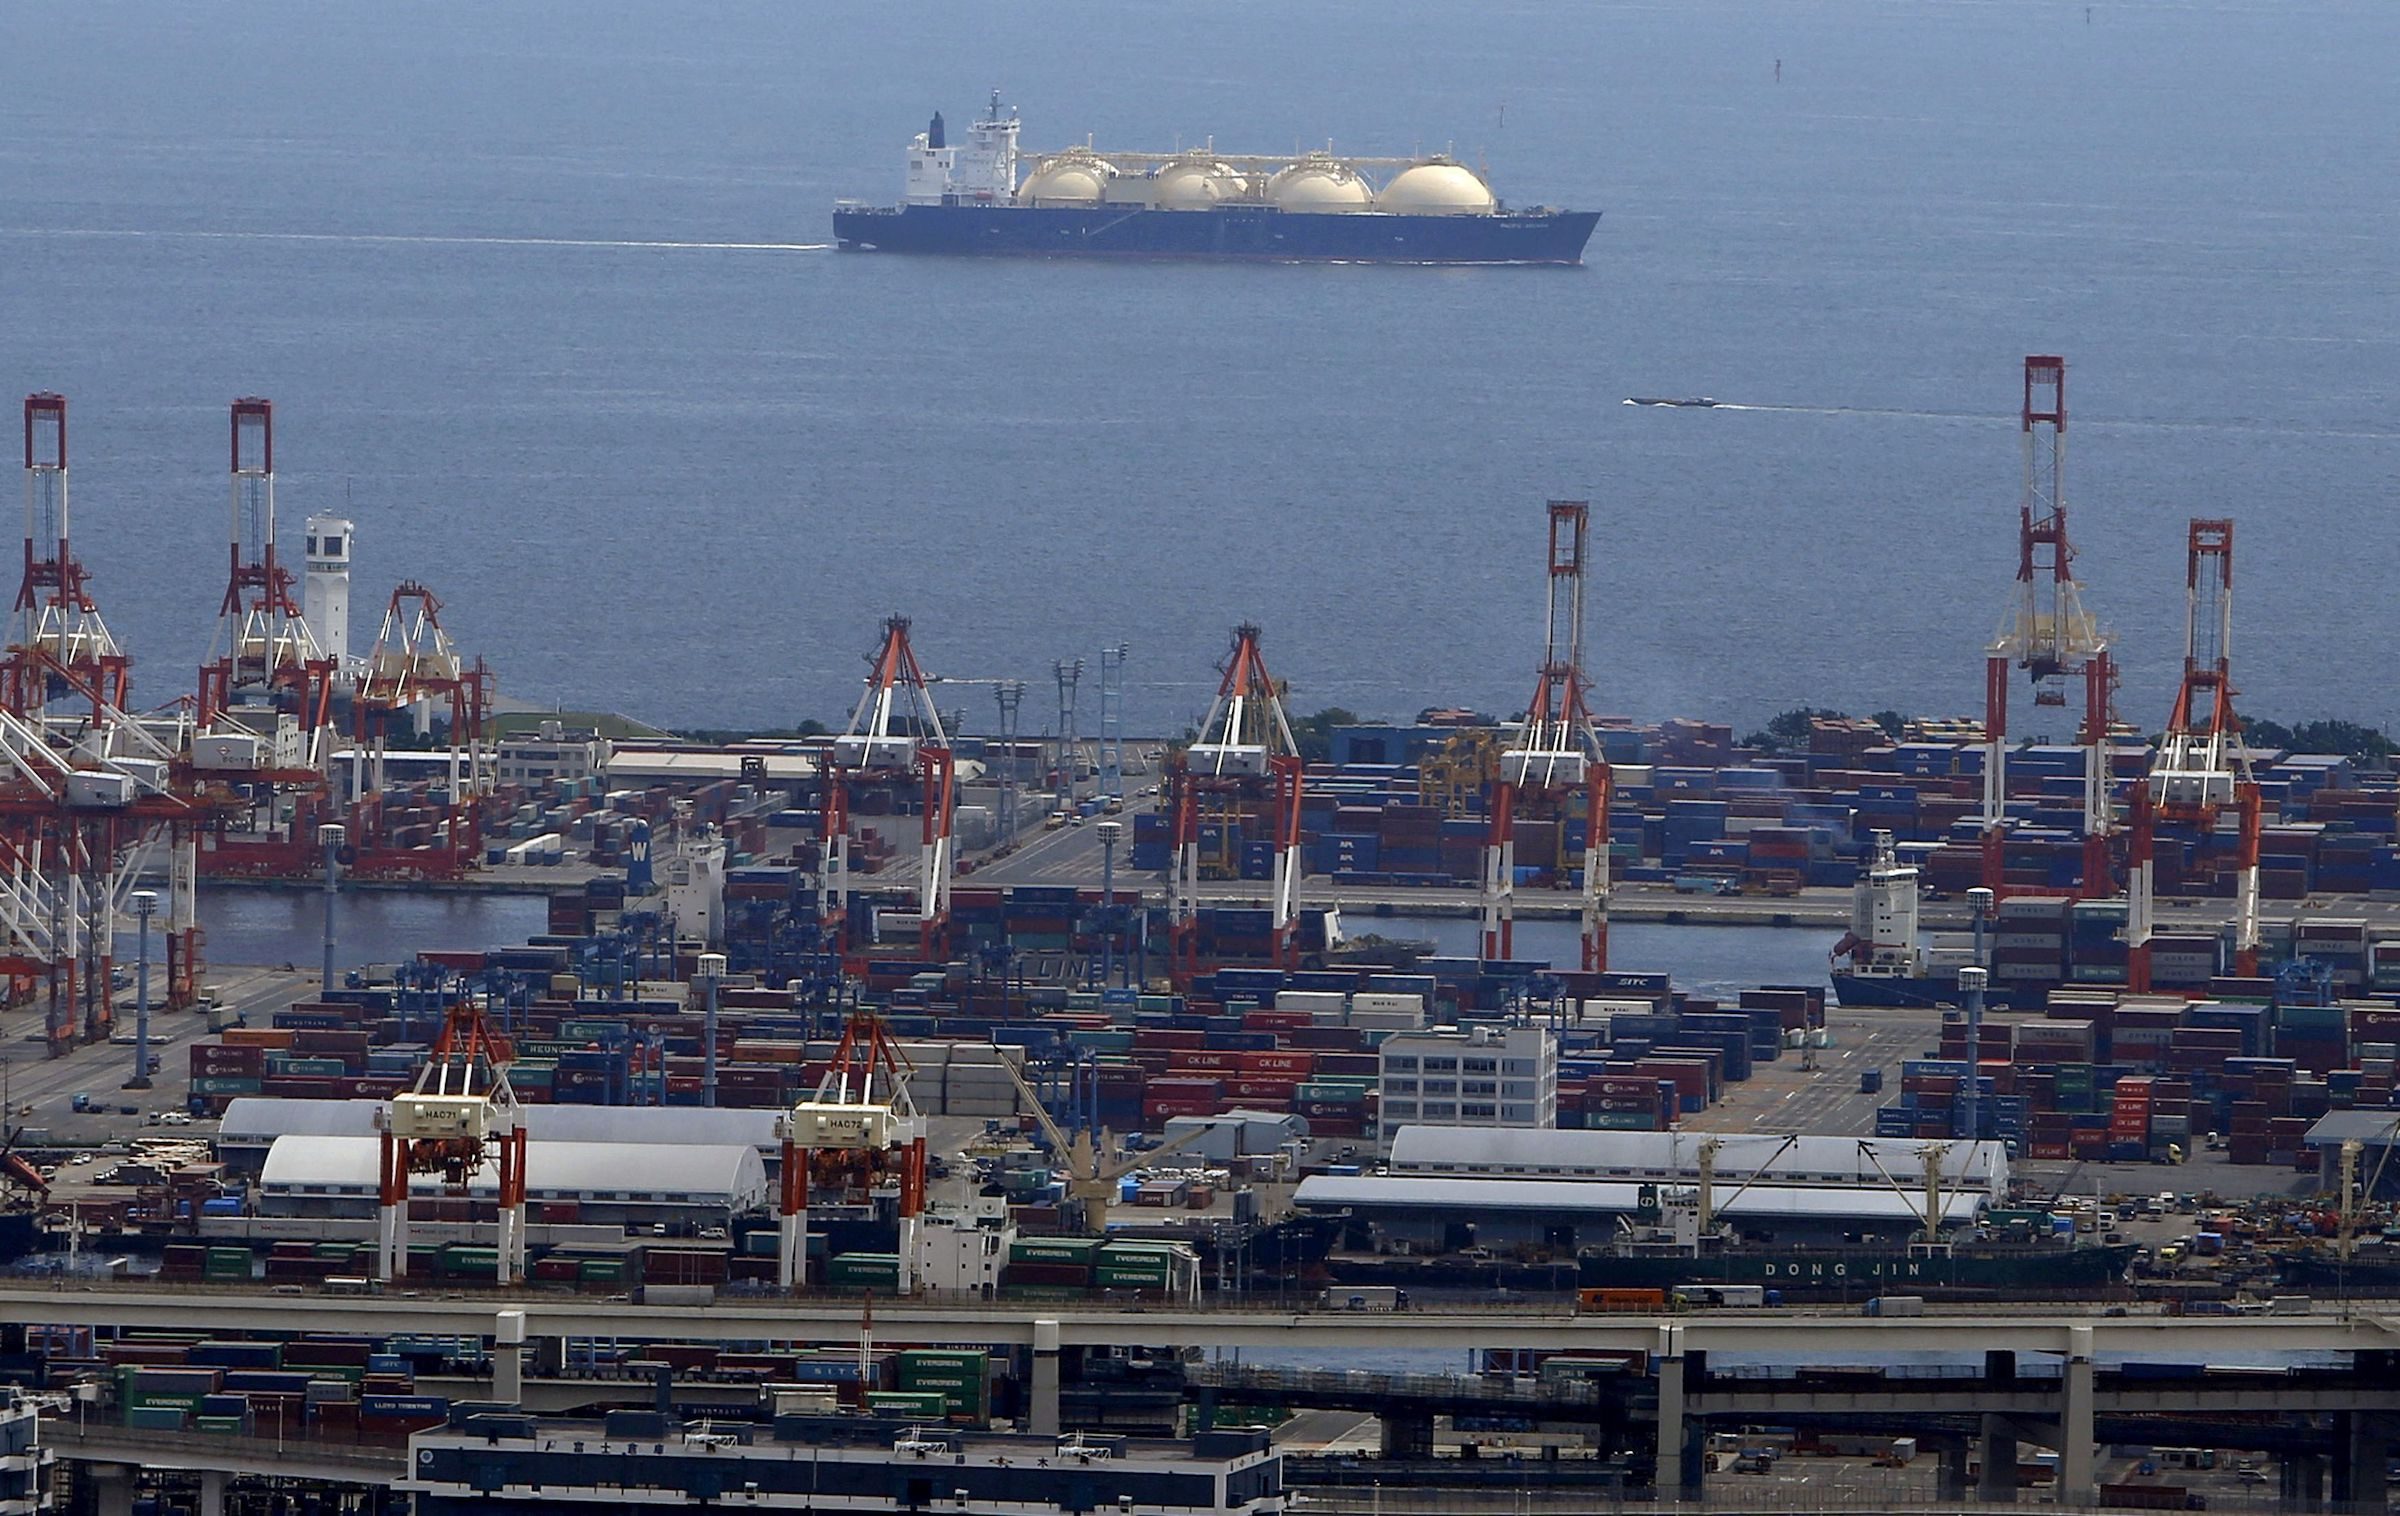 Japan tops up LNG reserves as possible Russian gas cutoff looms – source